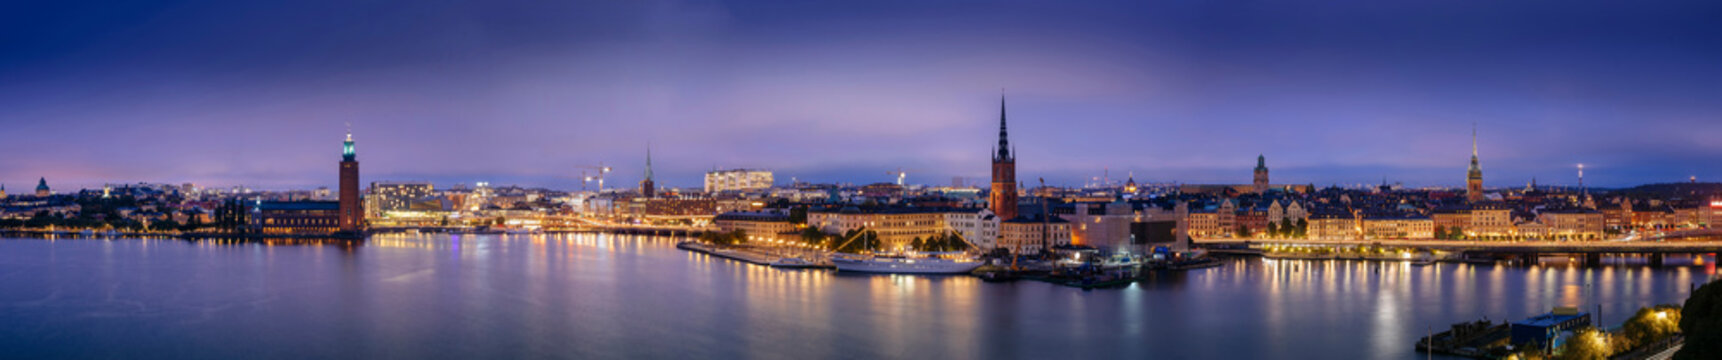 Sweden, Sotckholm City Skyline During Late Sunset, view from Old Town pier to Sodermalm district © Atmosphere